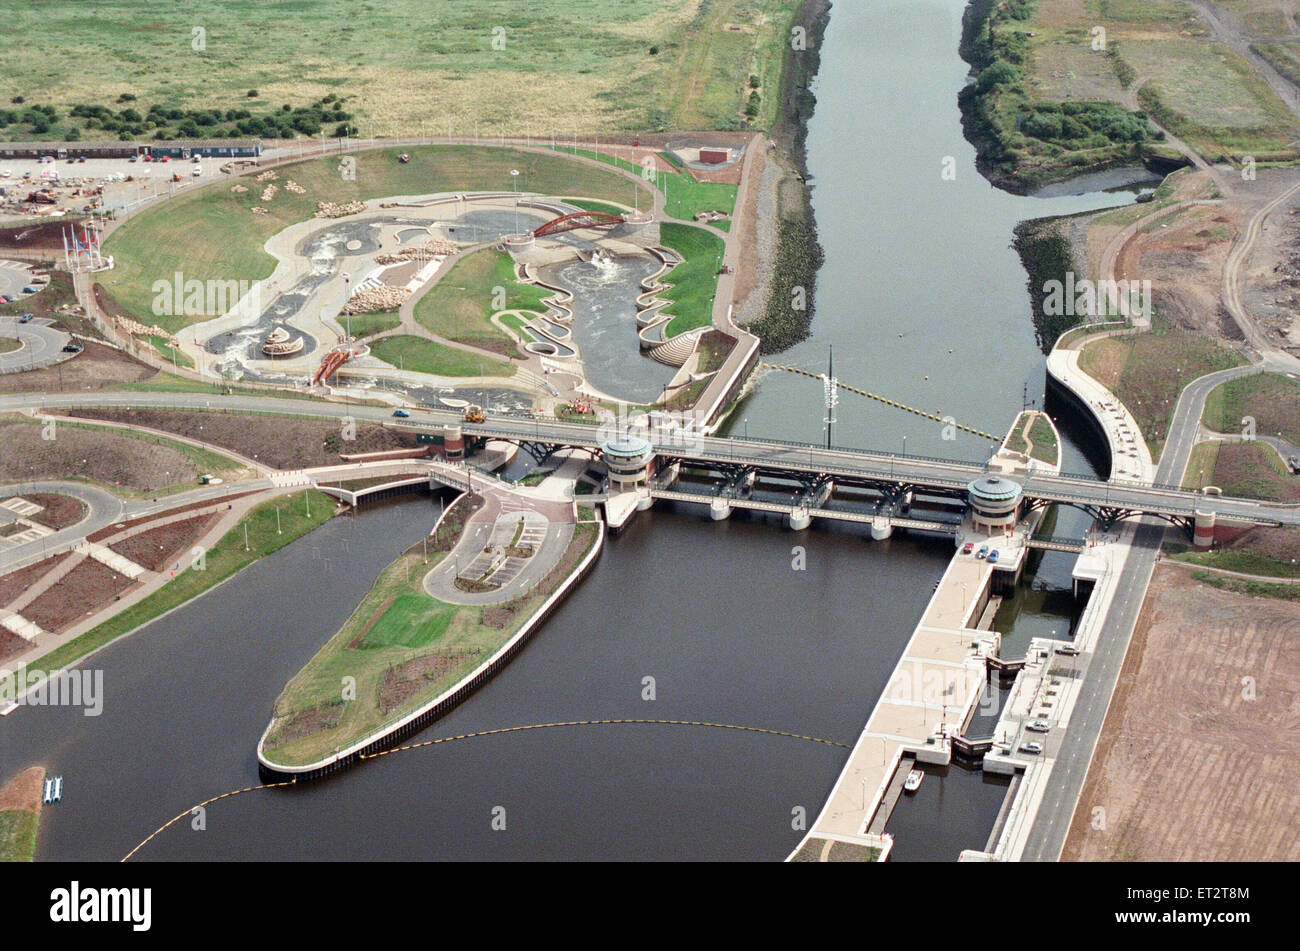 Aerial view of Teesside. Tees Barrage & White Water Canoe slalom. 28th July 1995. Stock Photo